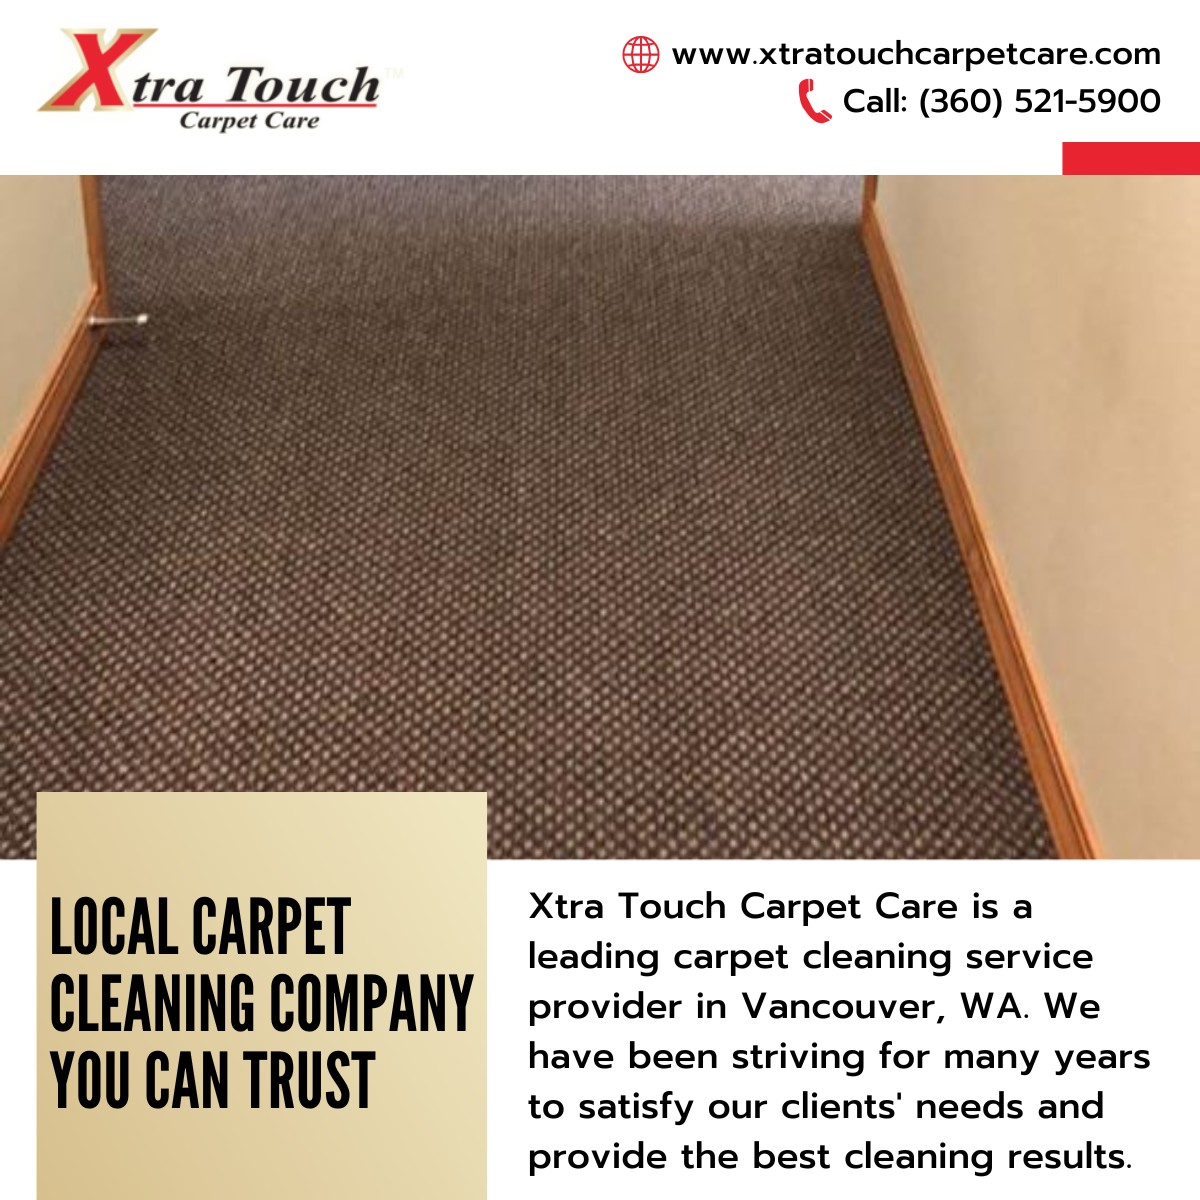  The Best Carpet Cleaning Services In Vancouver WA